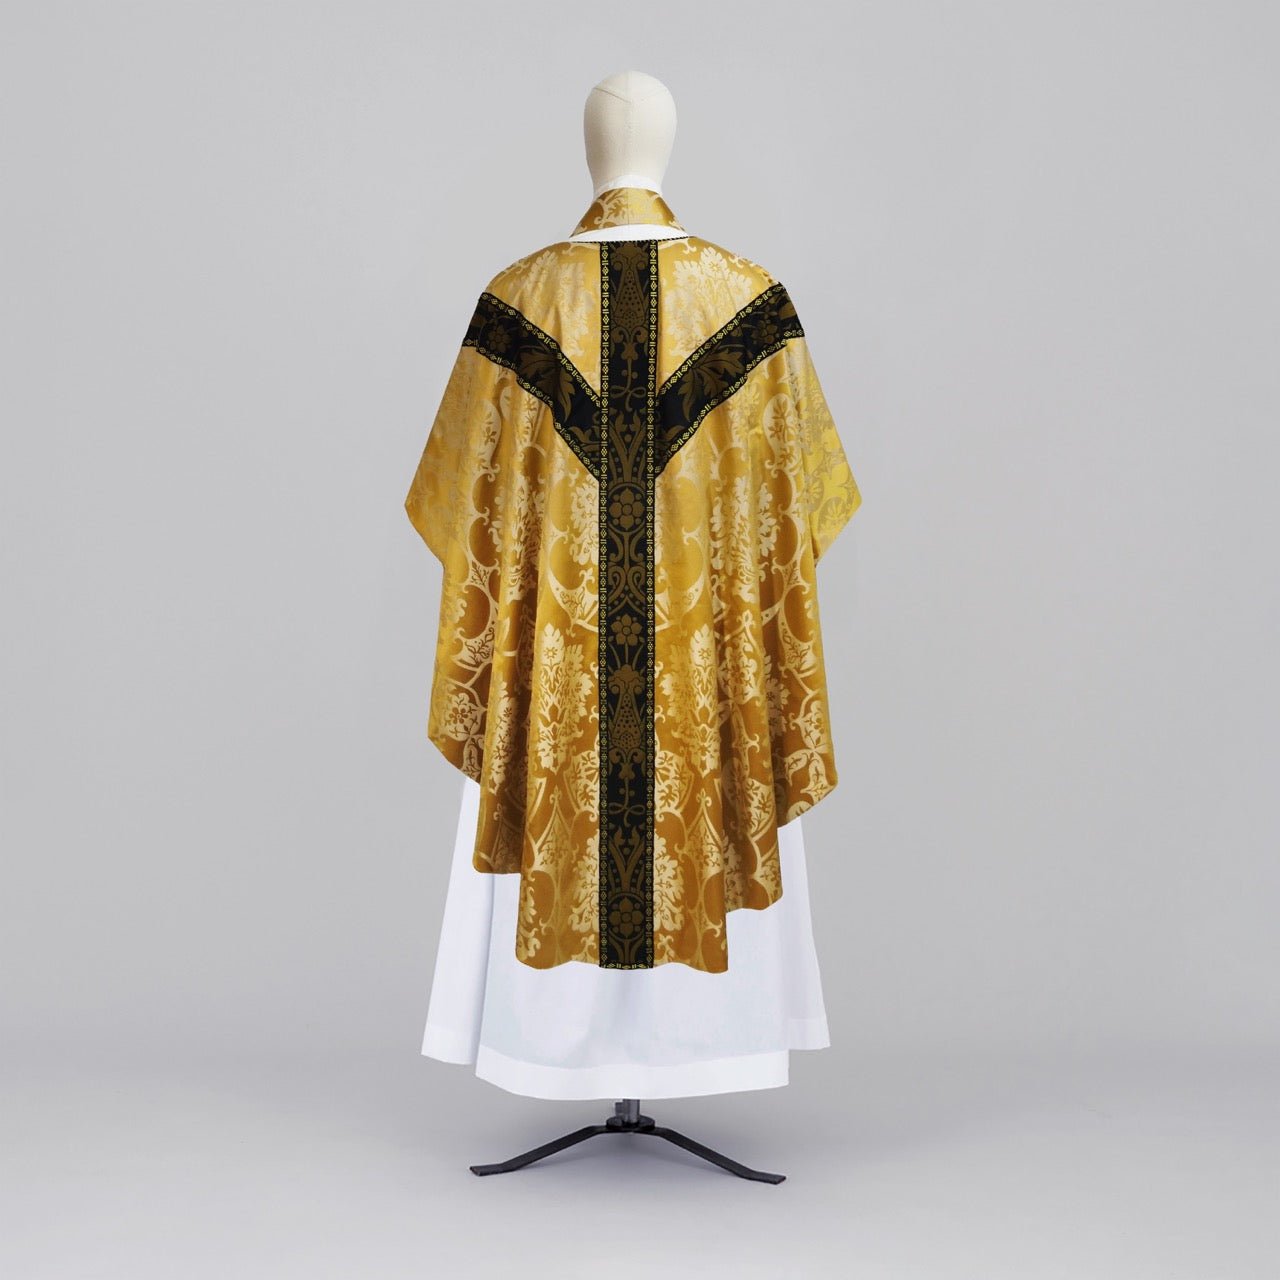 Full Gothic Chasuble in Gold/Cream 'Gothic' with Black/Gold 'Shrewsbury' Orphreys - Watts & Co.